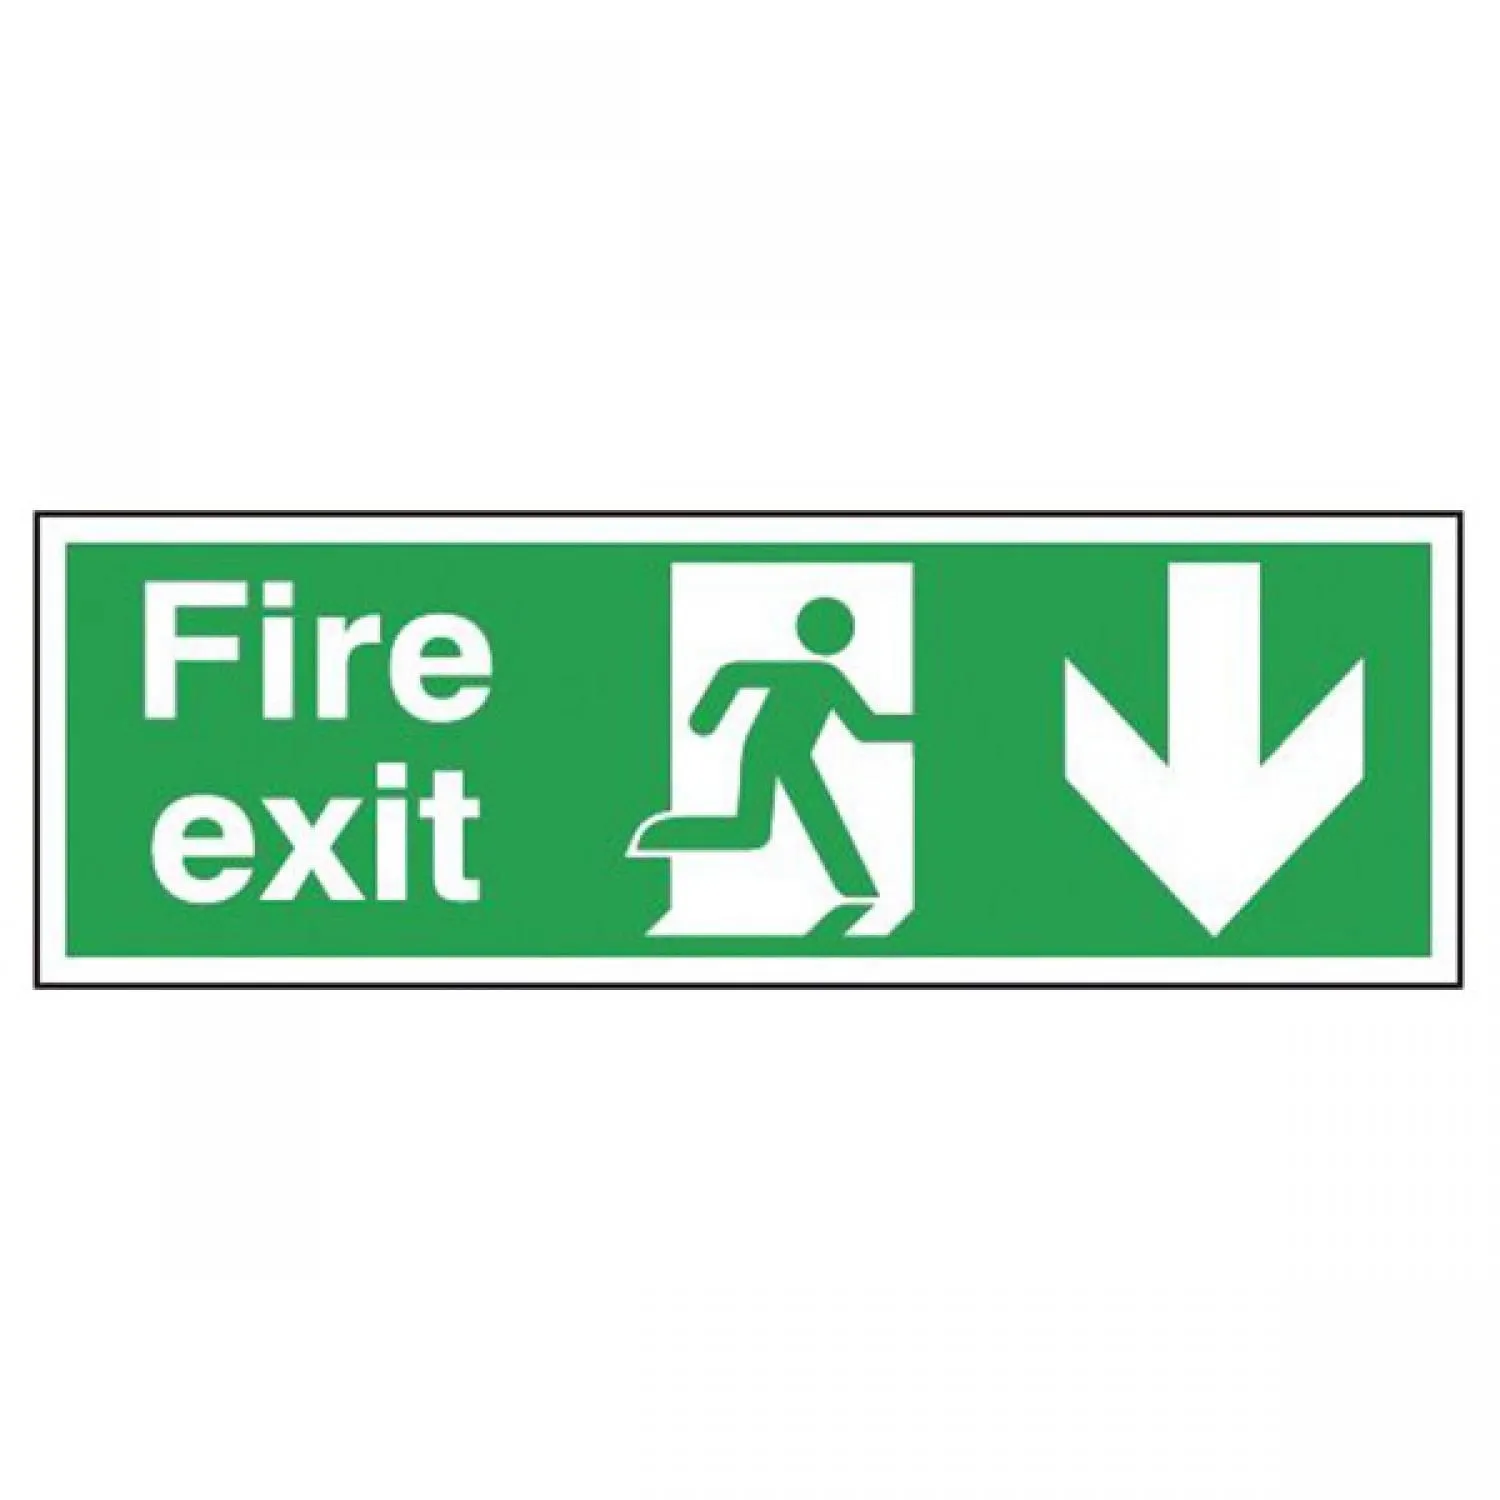 Rigid Site Safety Sign - Fire Exit Running Man (Arrow Down) 150x450mm